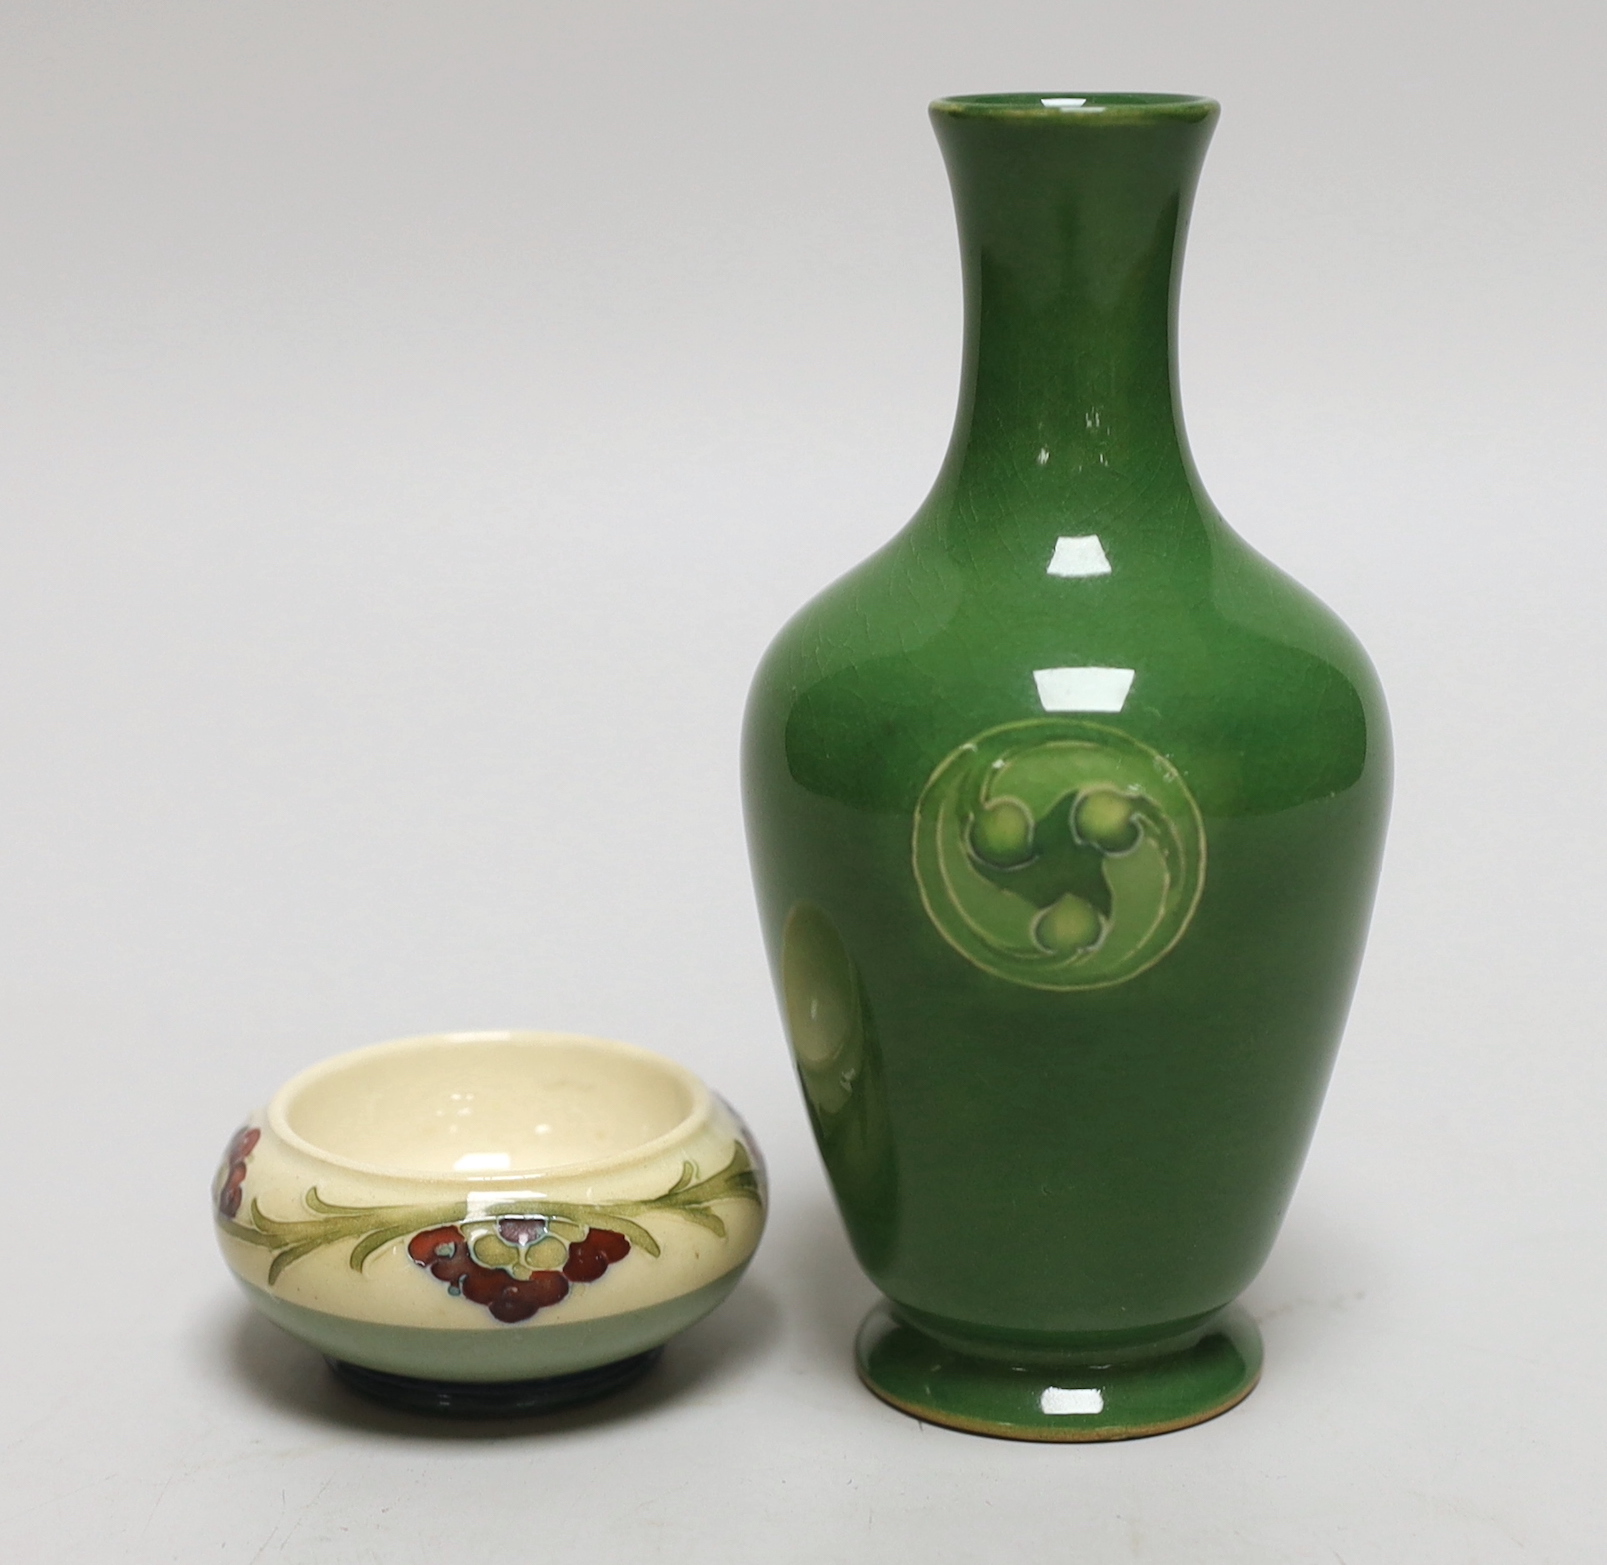 A Moorcroft for Liberty & Co. Flamminian ware green-glazed vase and a Mcintyre salt, tallest 13cm